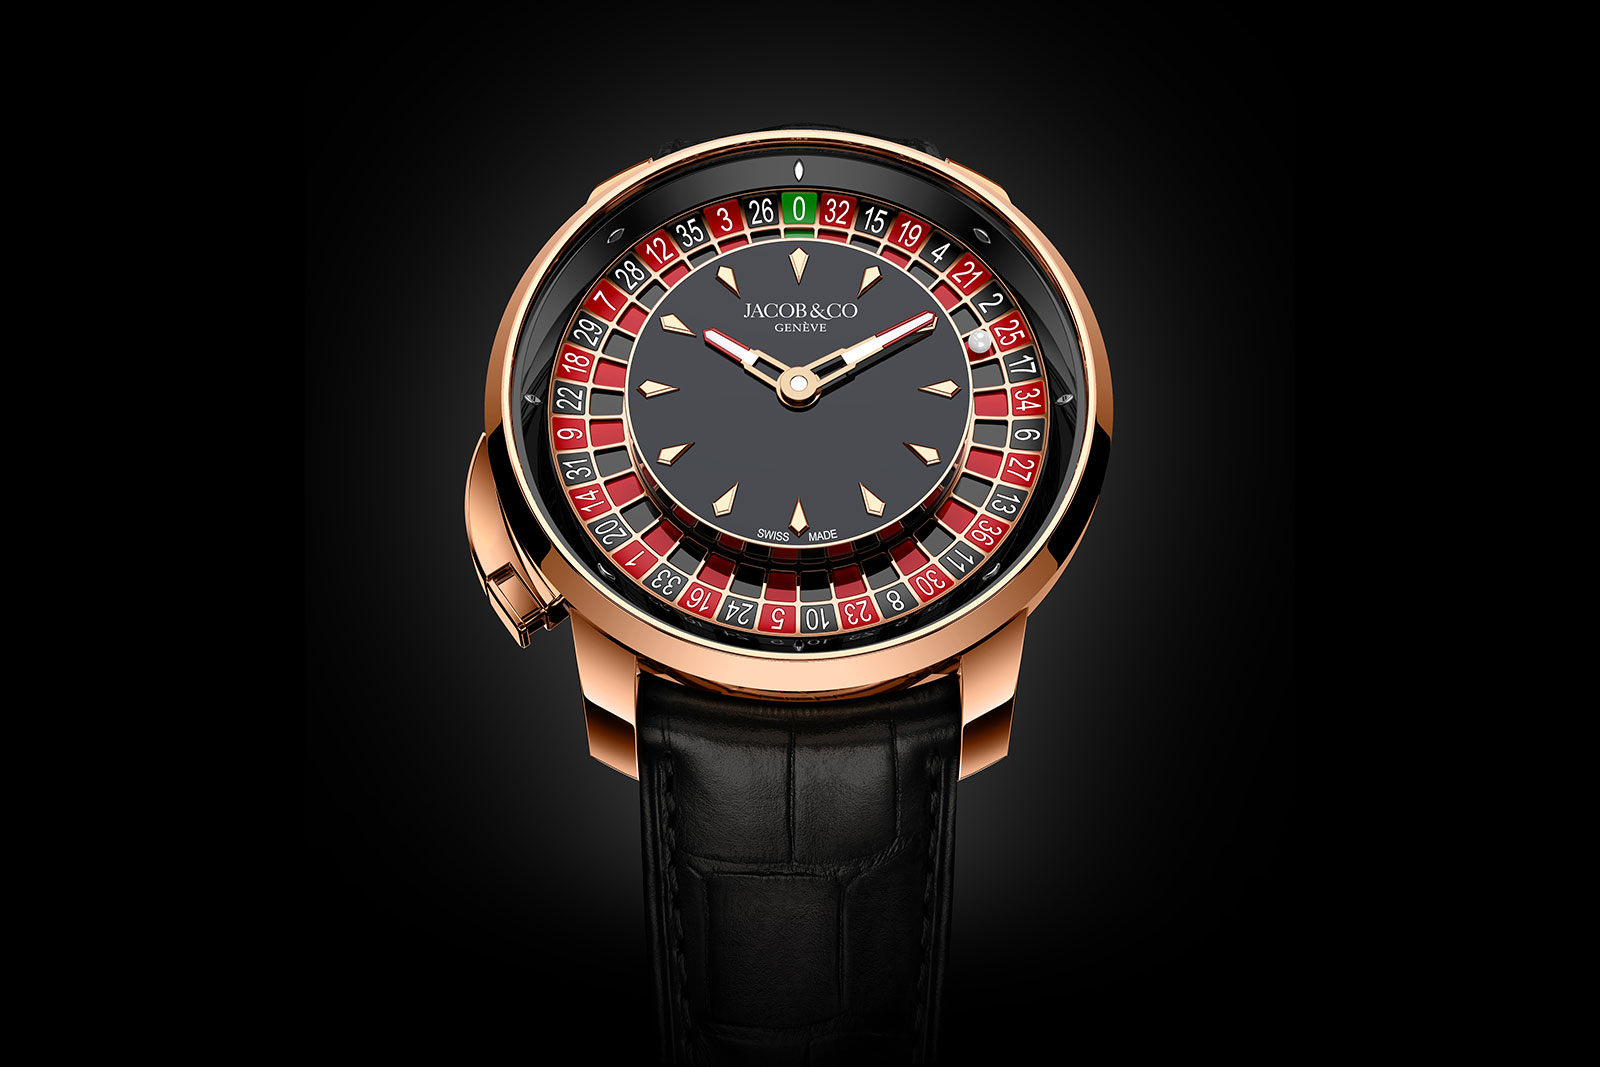 Jacob & Co. Astronomia Casino 47 mm Watch in Black Dial